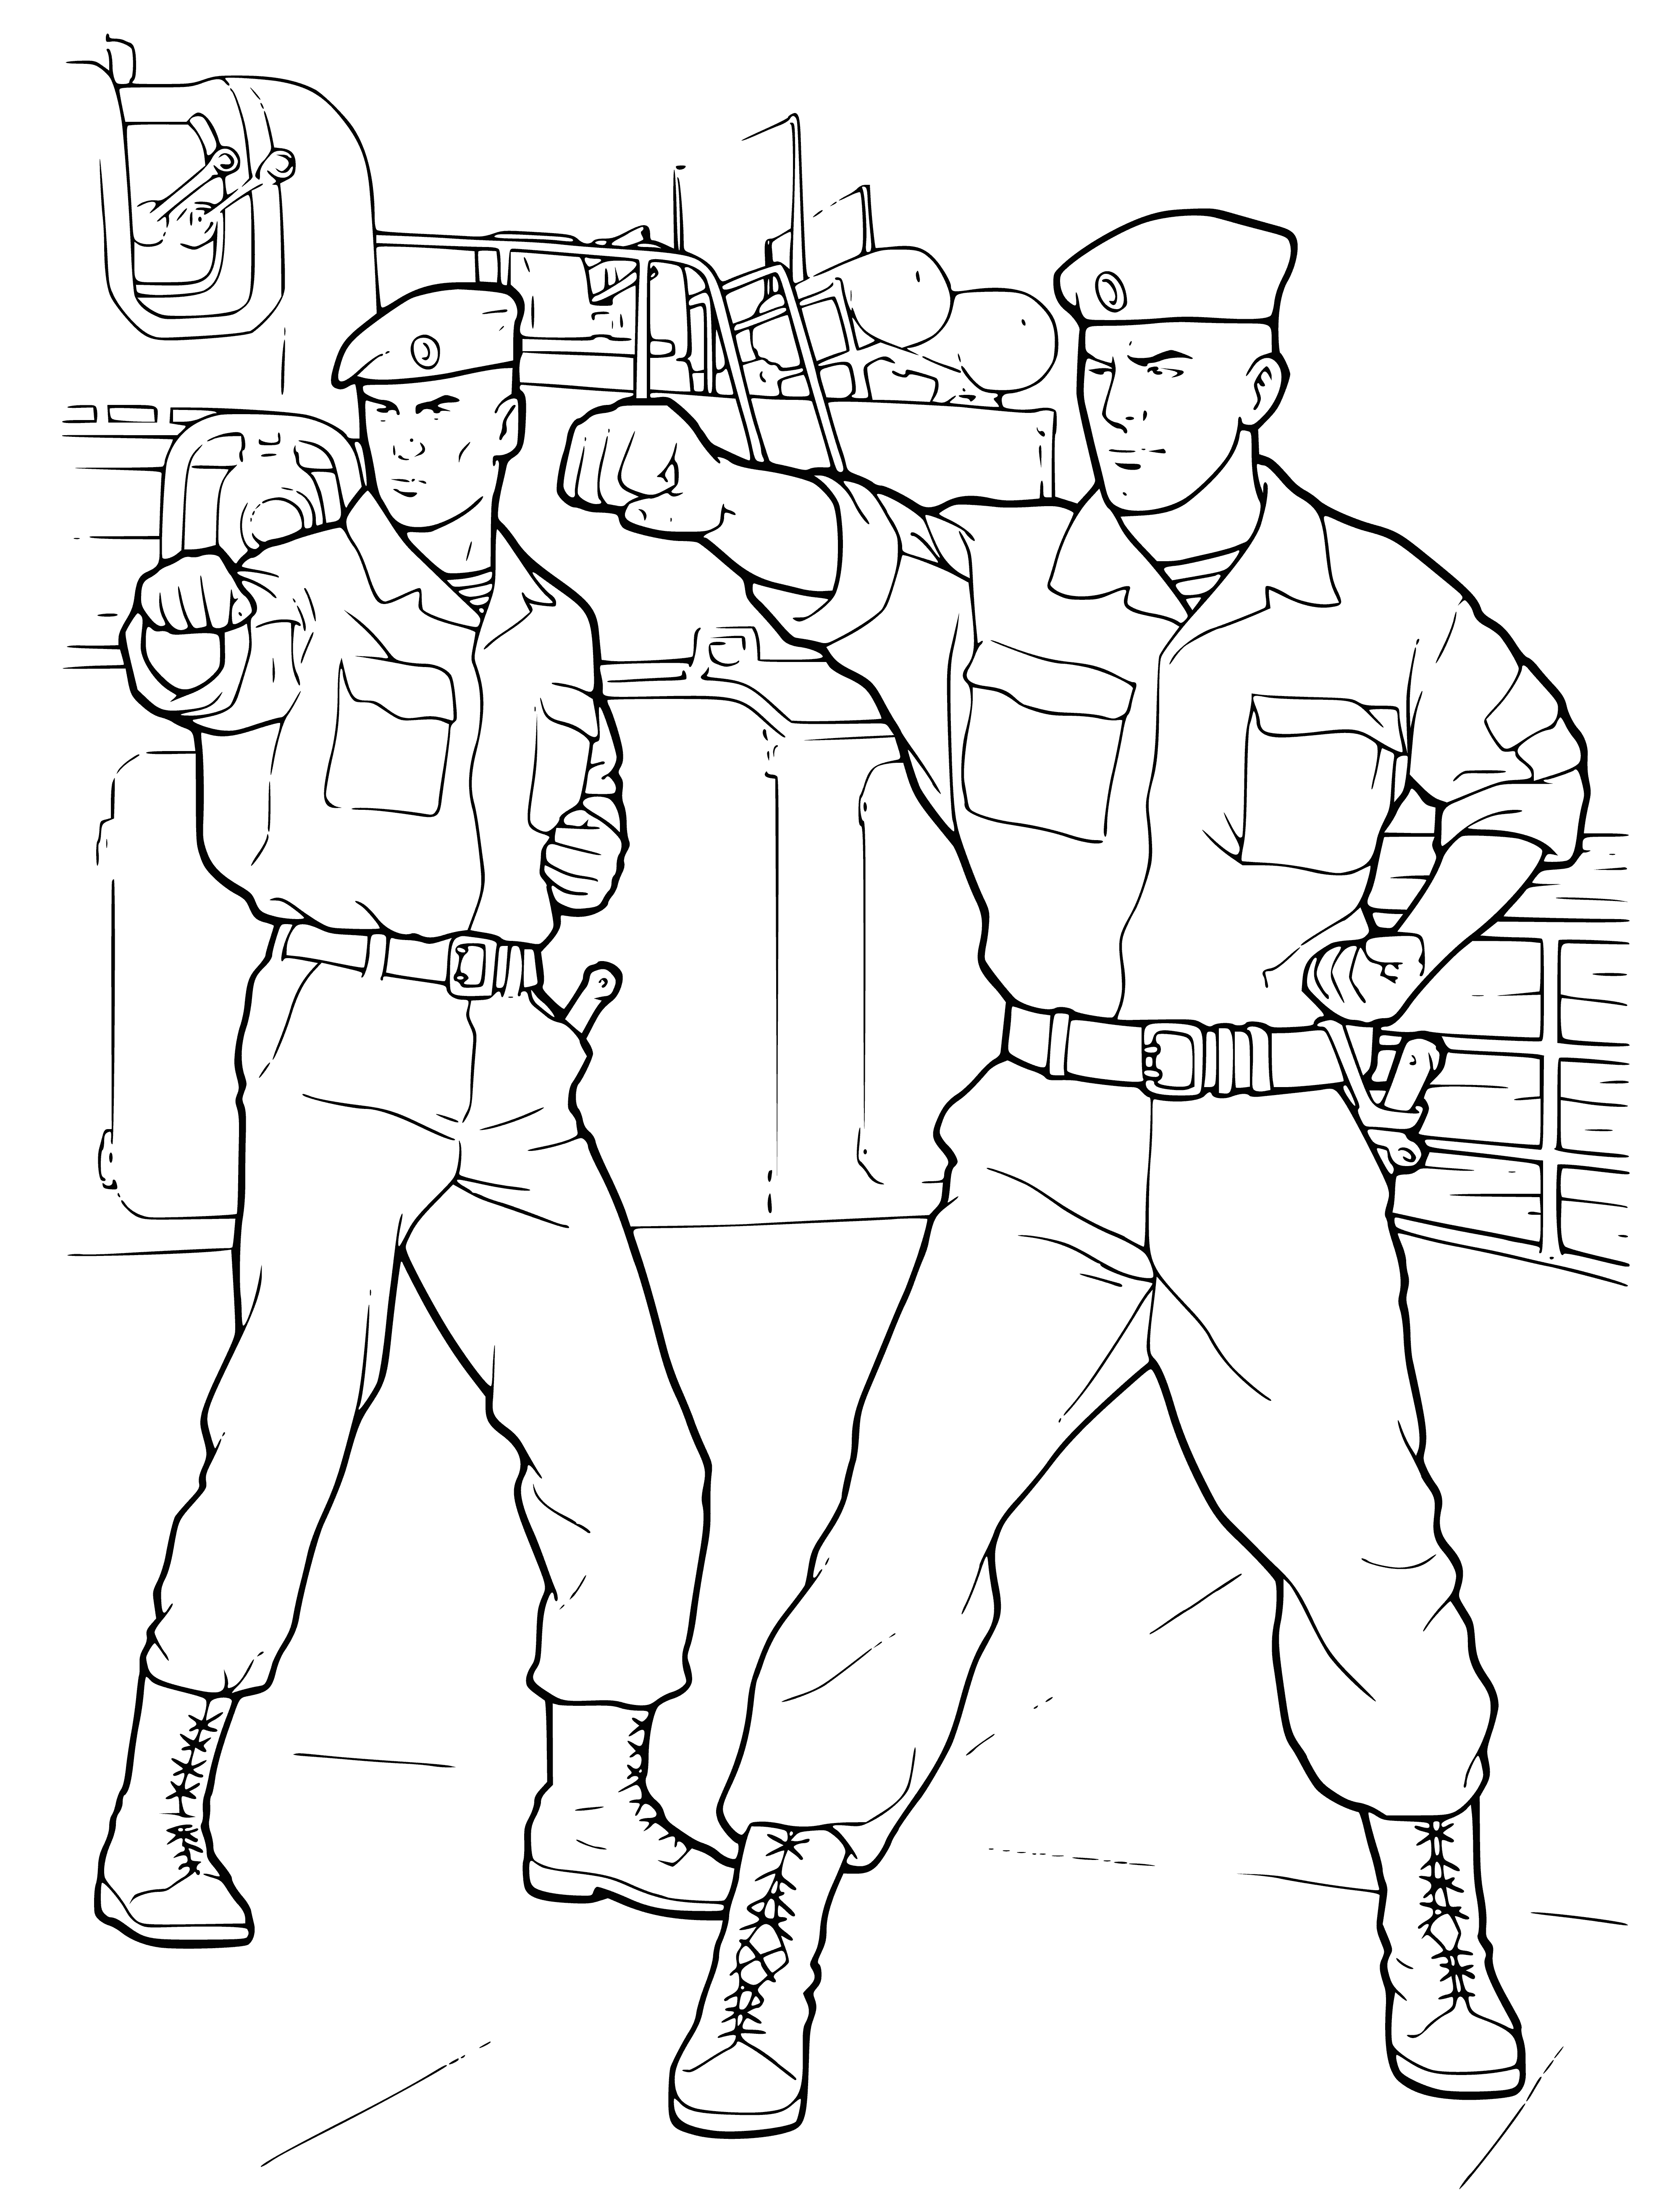 coloring page: Troops of the Russian army march on a coloring page w/ serious and disciplined resolves. Guns in hand.